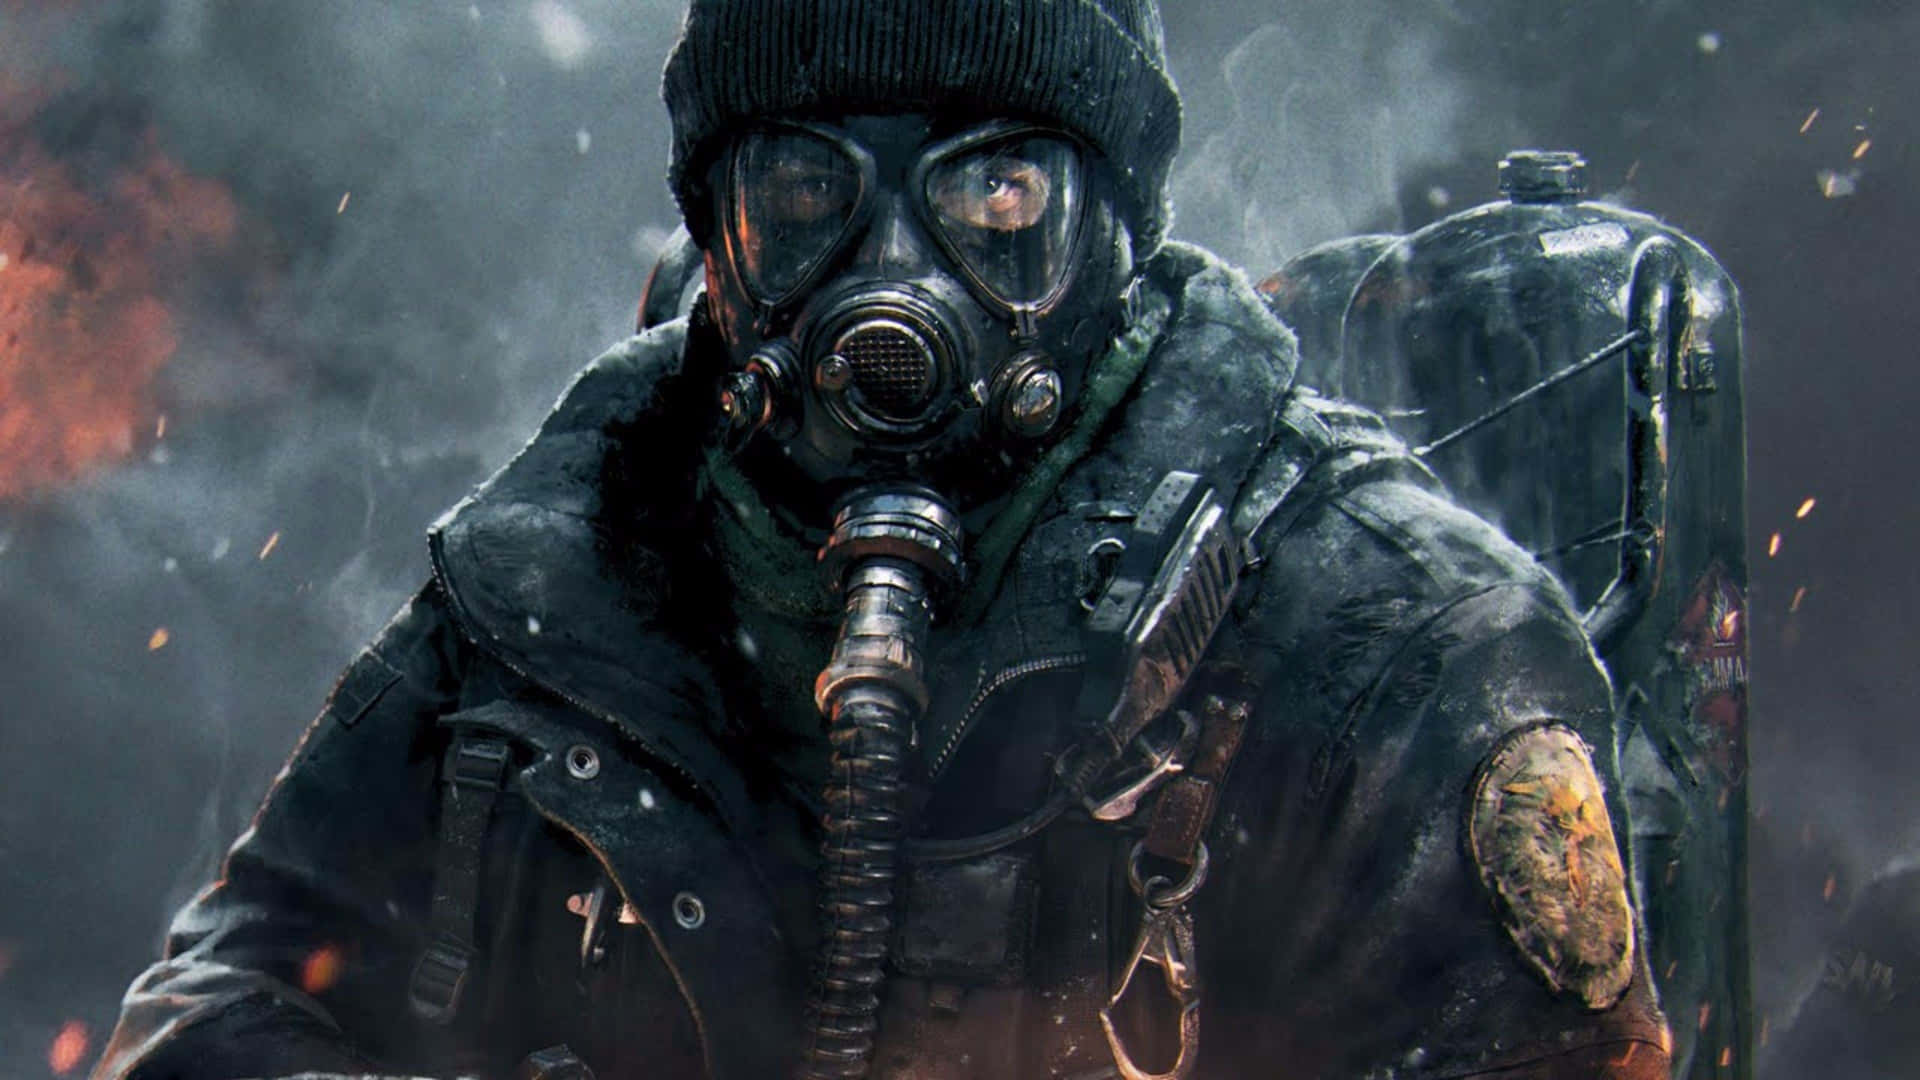 A Man In A Gas Mask Is Holding A Gun